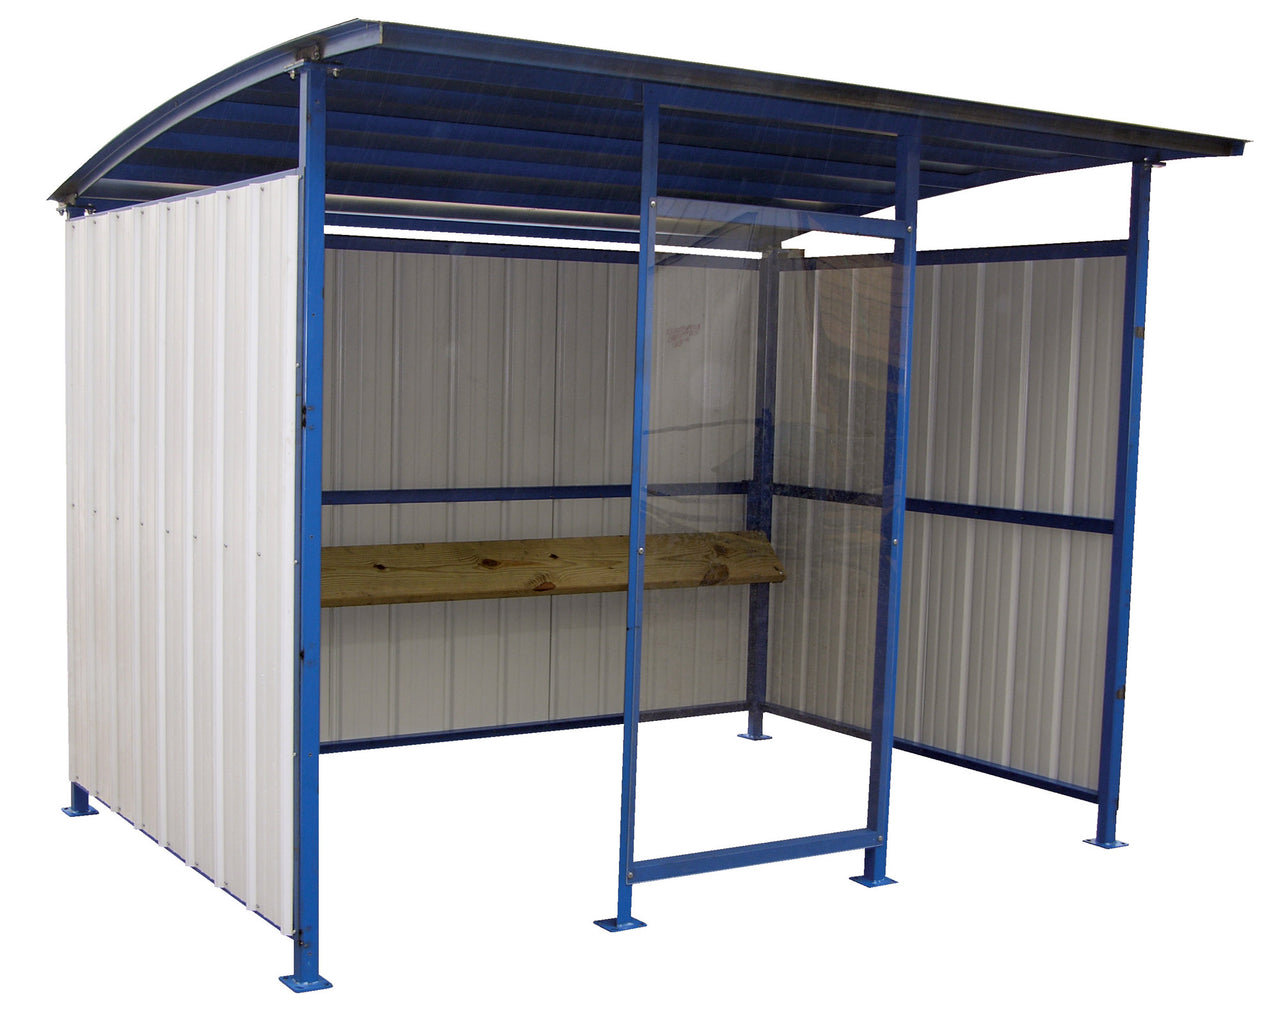 Multi-Duty Shed - Smokers Shelter